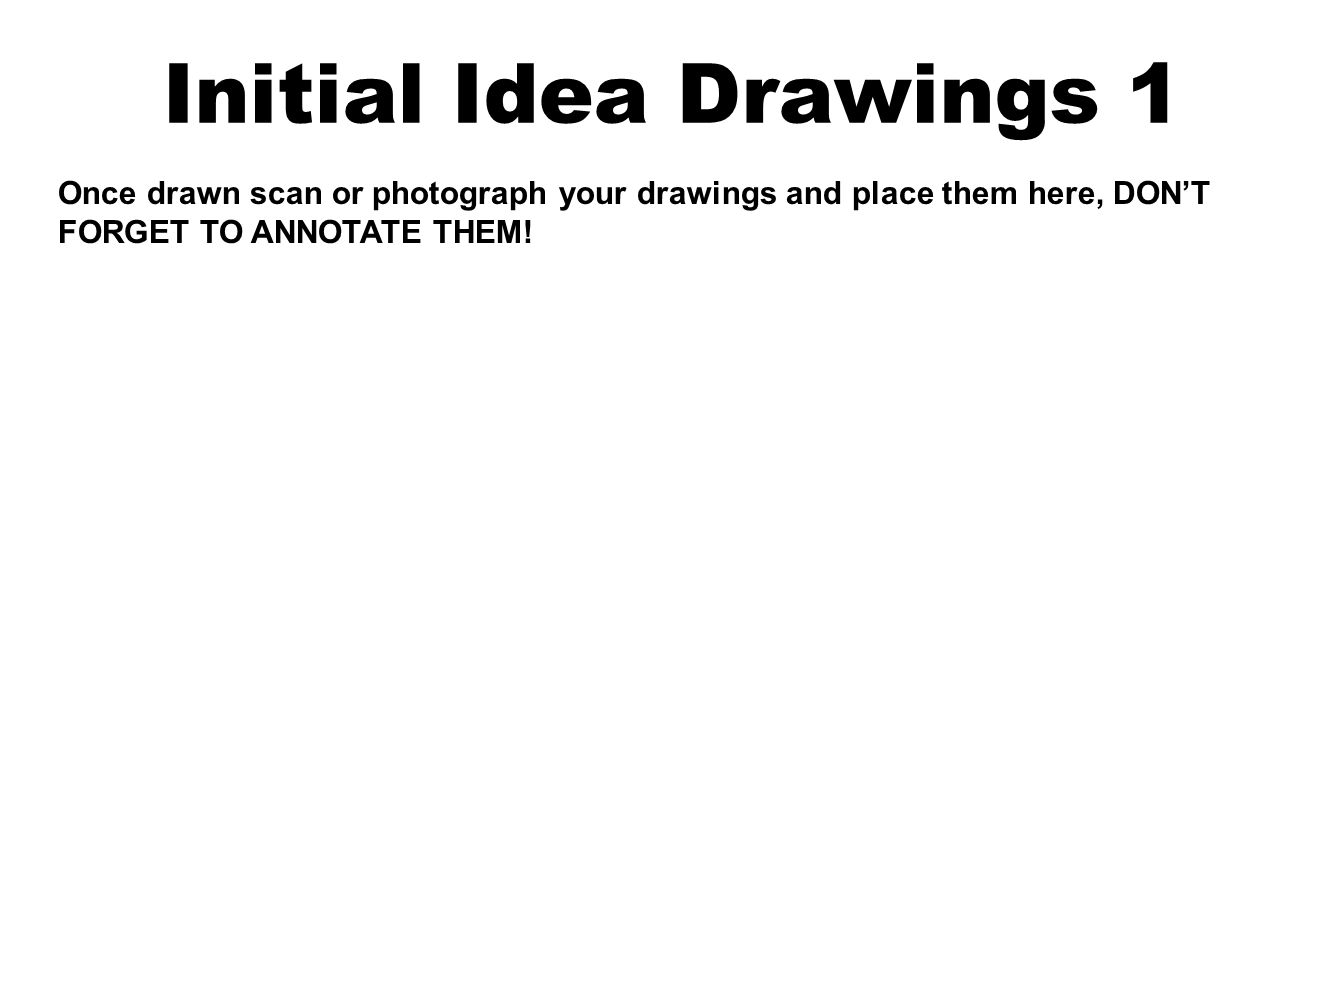 Initial Idea Drawings 1 Once drawn scan or photograph your drawings and place them here, DON’T FORGET TO ANNOTATE THEM!